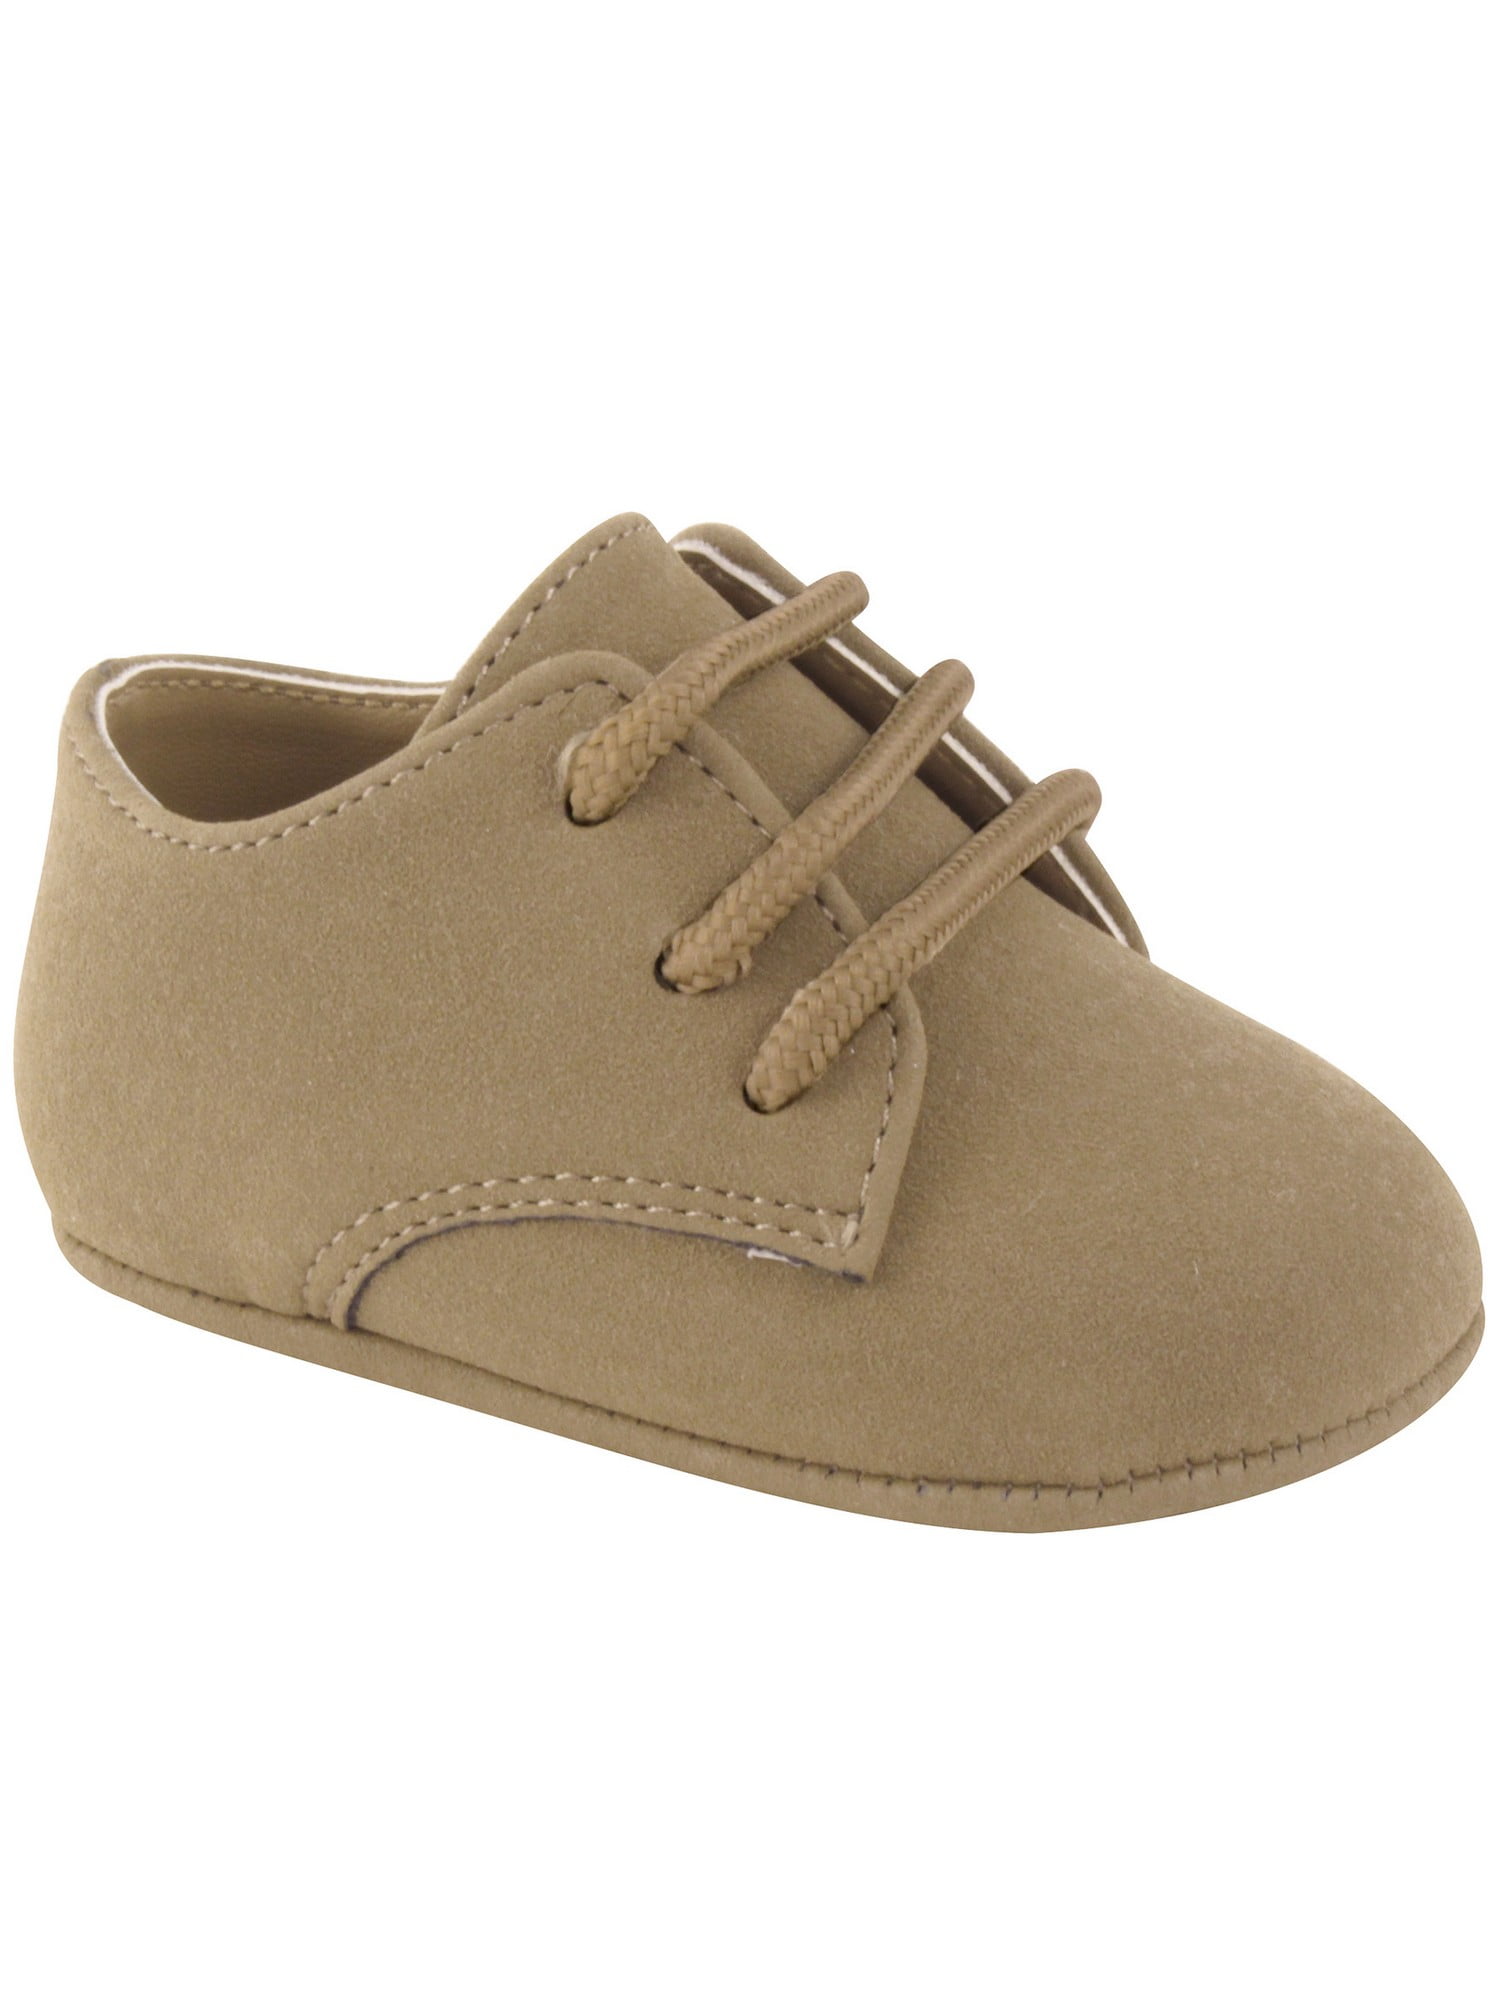 Baby Deer Boys Khaki Suede PU Lace Up 